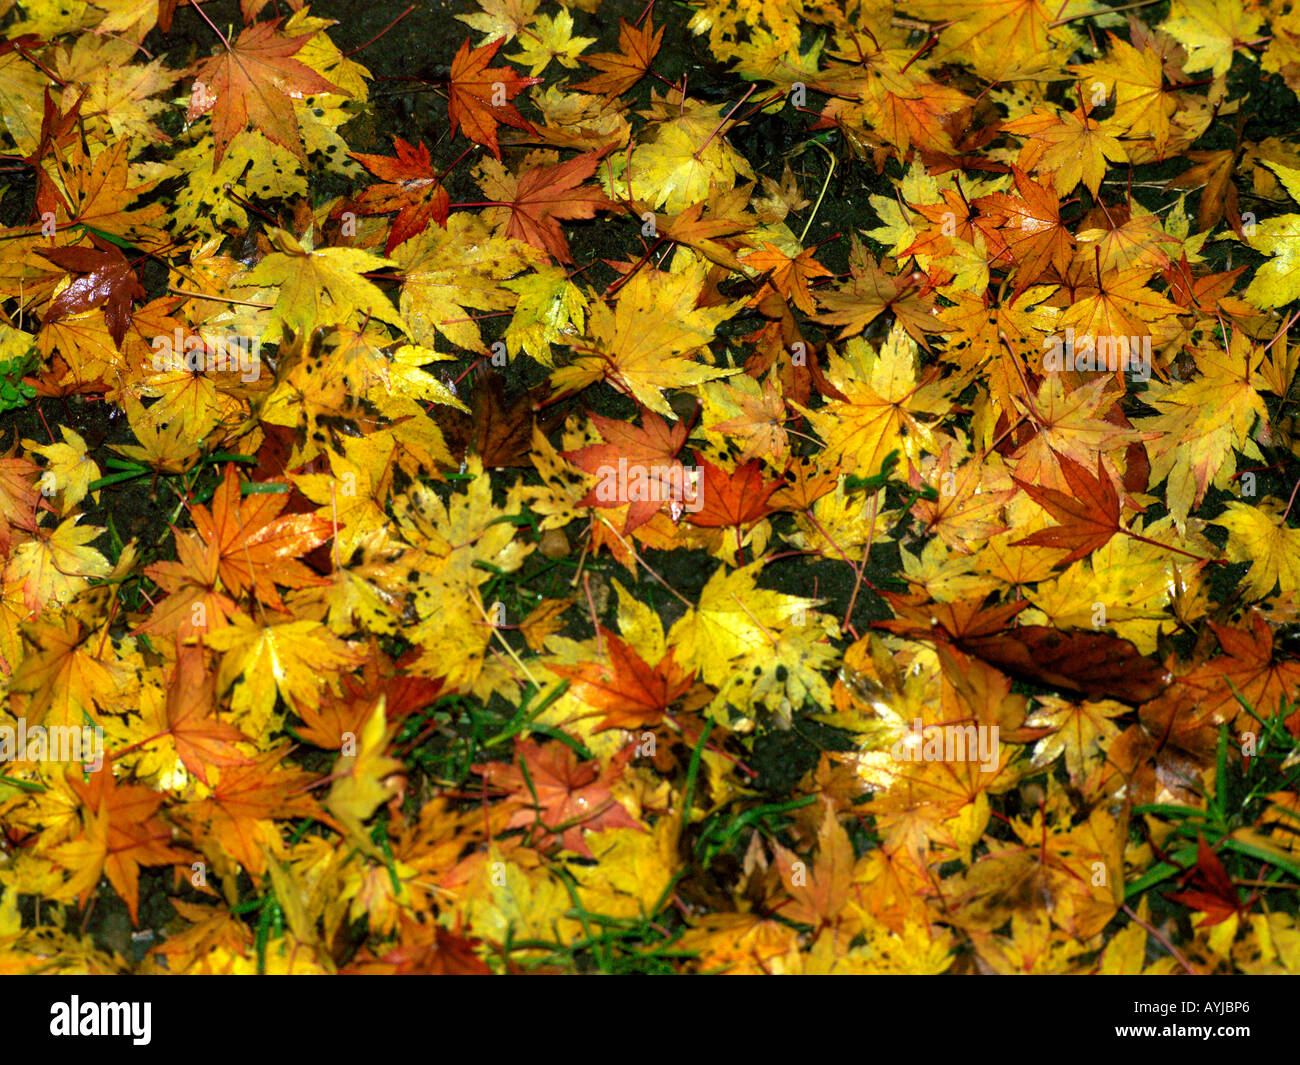 Acer Leaf Background Autumn Leaves on Grass Stock Photo